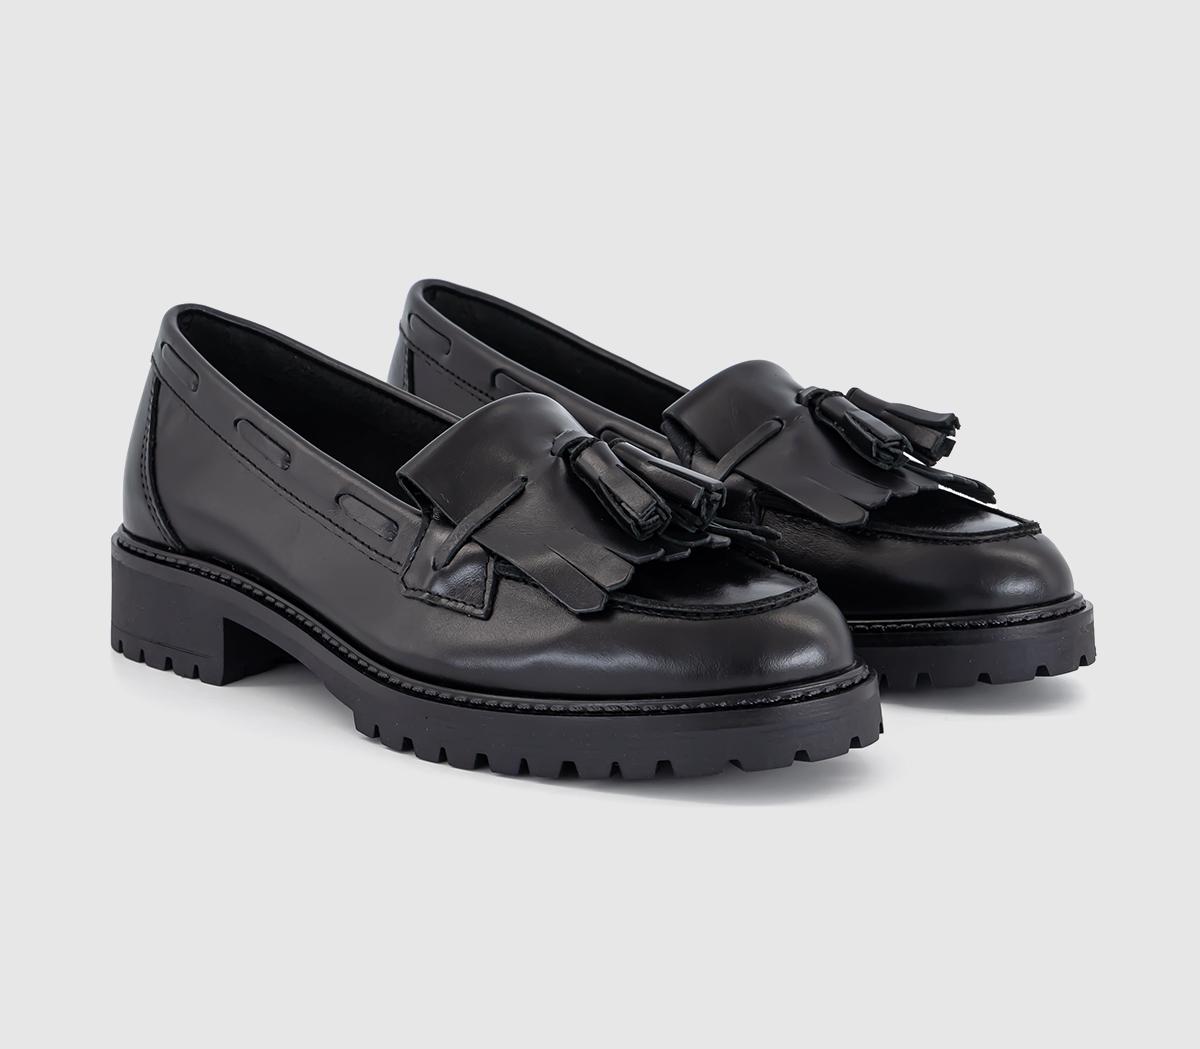 OFFICE Womens Frey Fringe Tassel Cleated Loafers Black Leather, 3